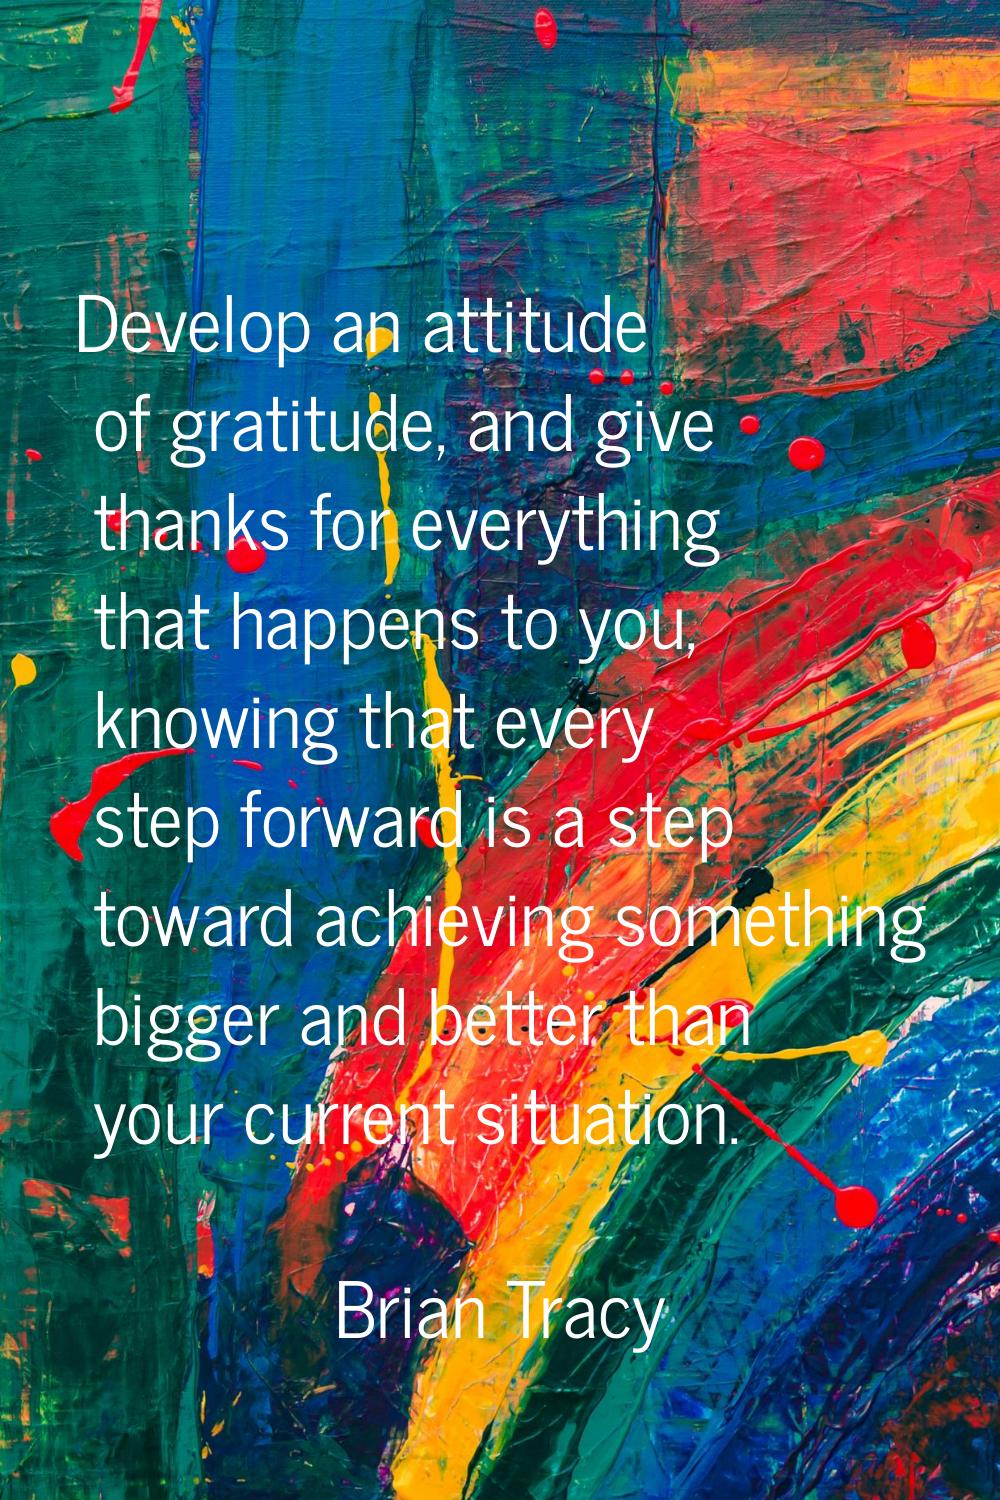 Develop an attitude of gratitude, and give thanks for everything that happens to you, knowing that 